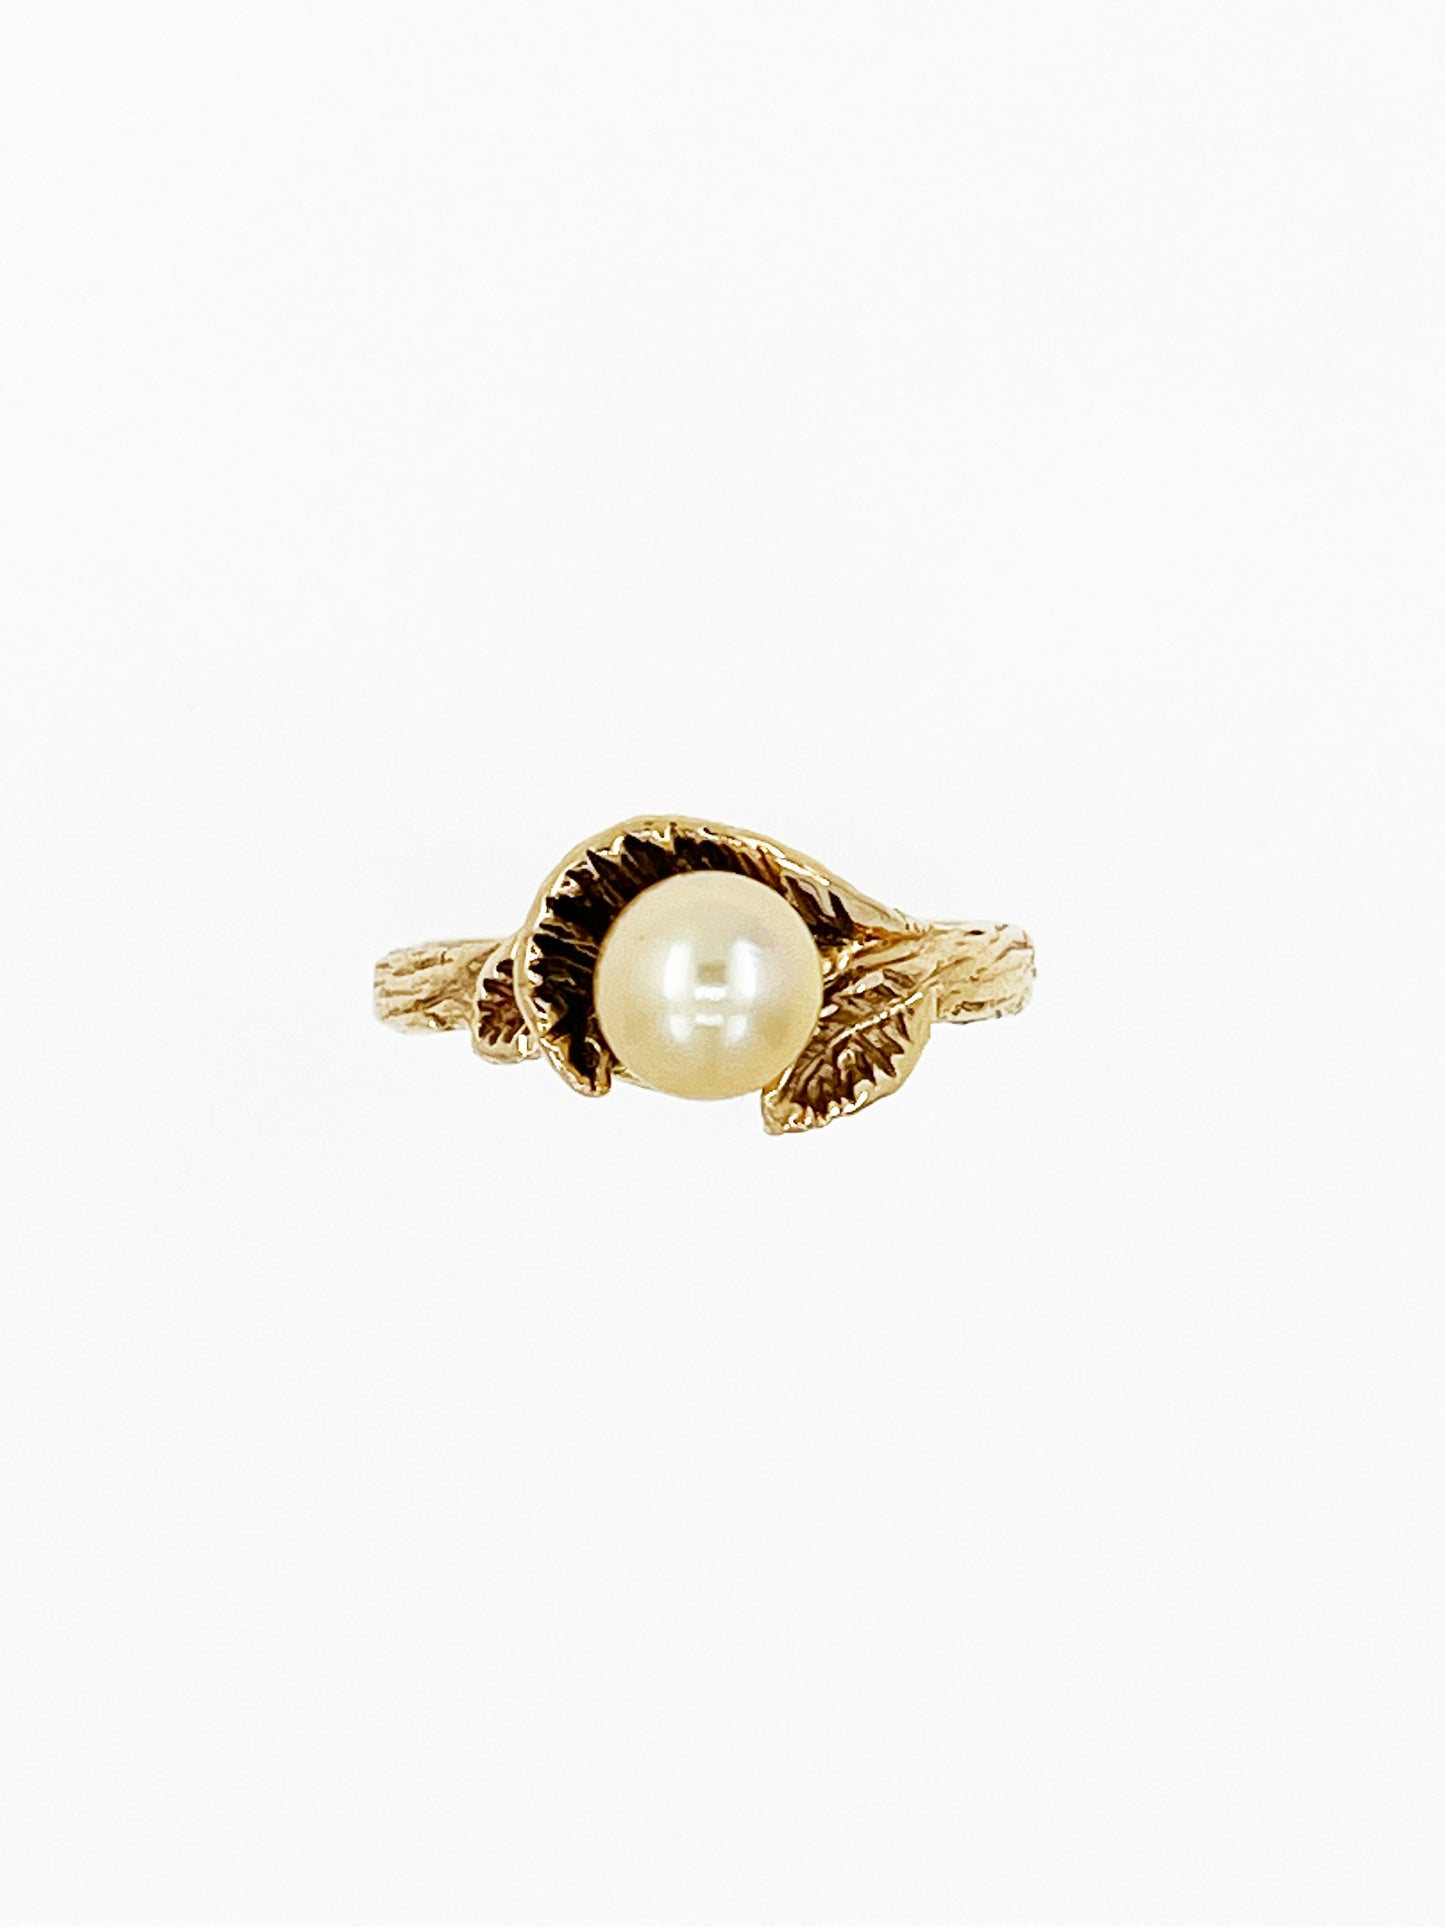 Antique Hand Carved Leafy Pearl Ring in 14k Yellow Gold